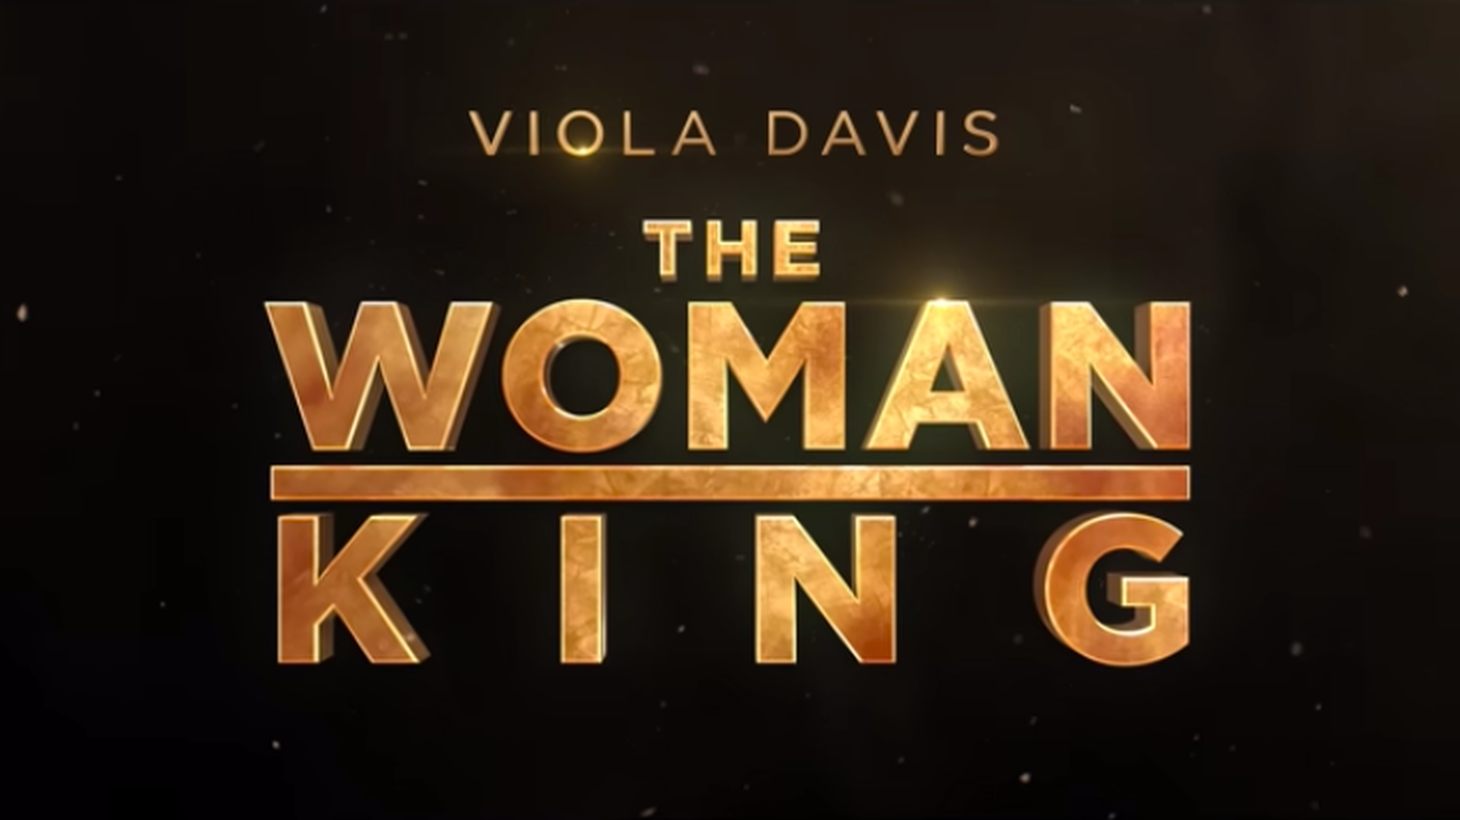 “The Woman King” follows a general, portrayed by Viola Davis, who commands an all-female warrior unit in West Africa.